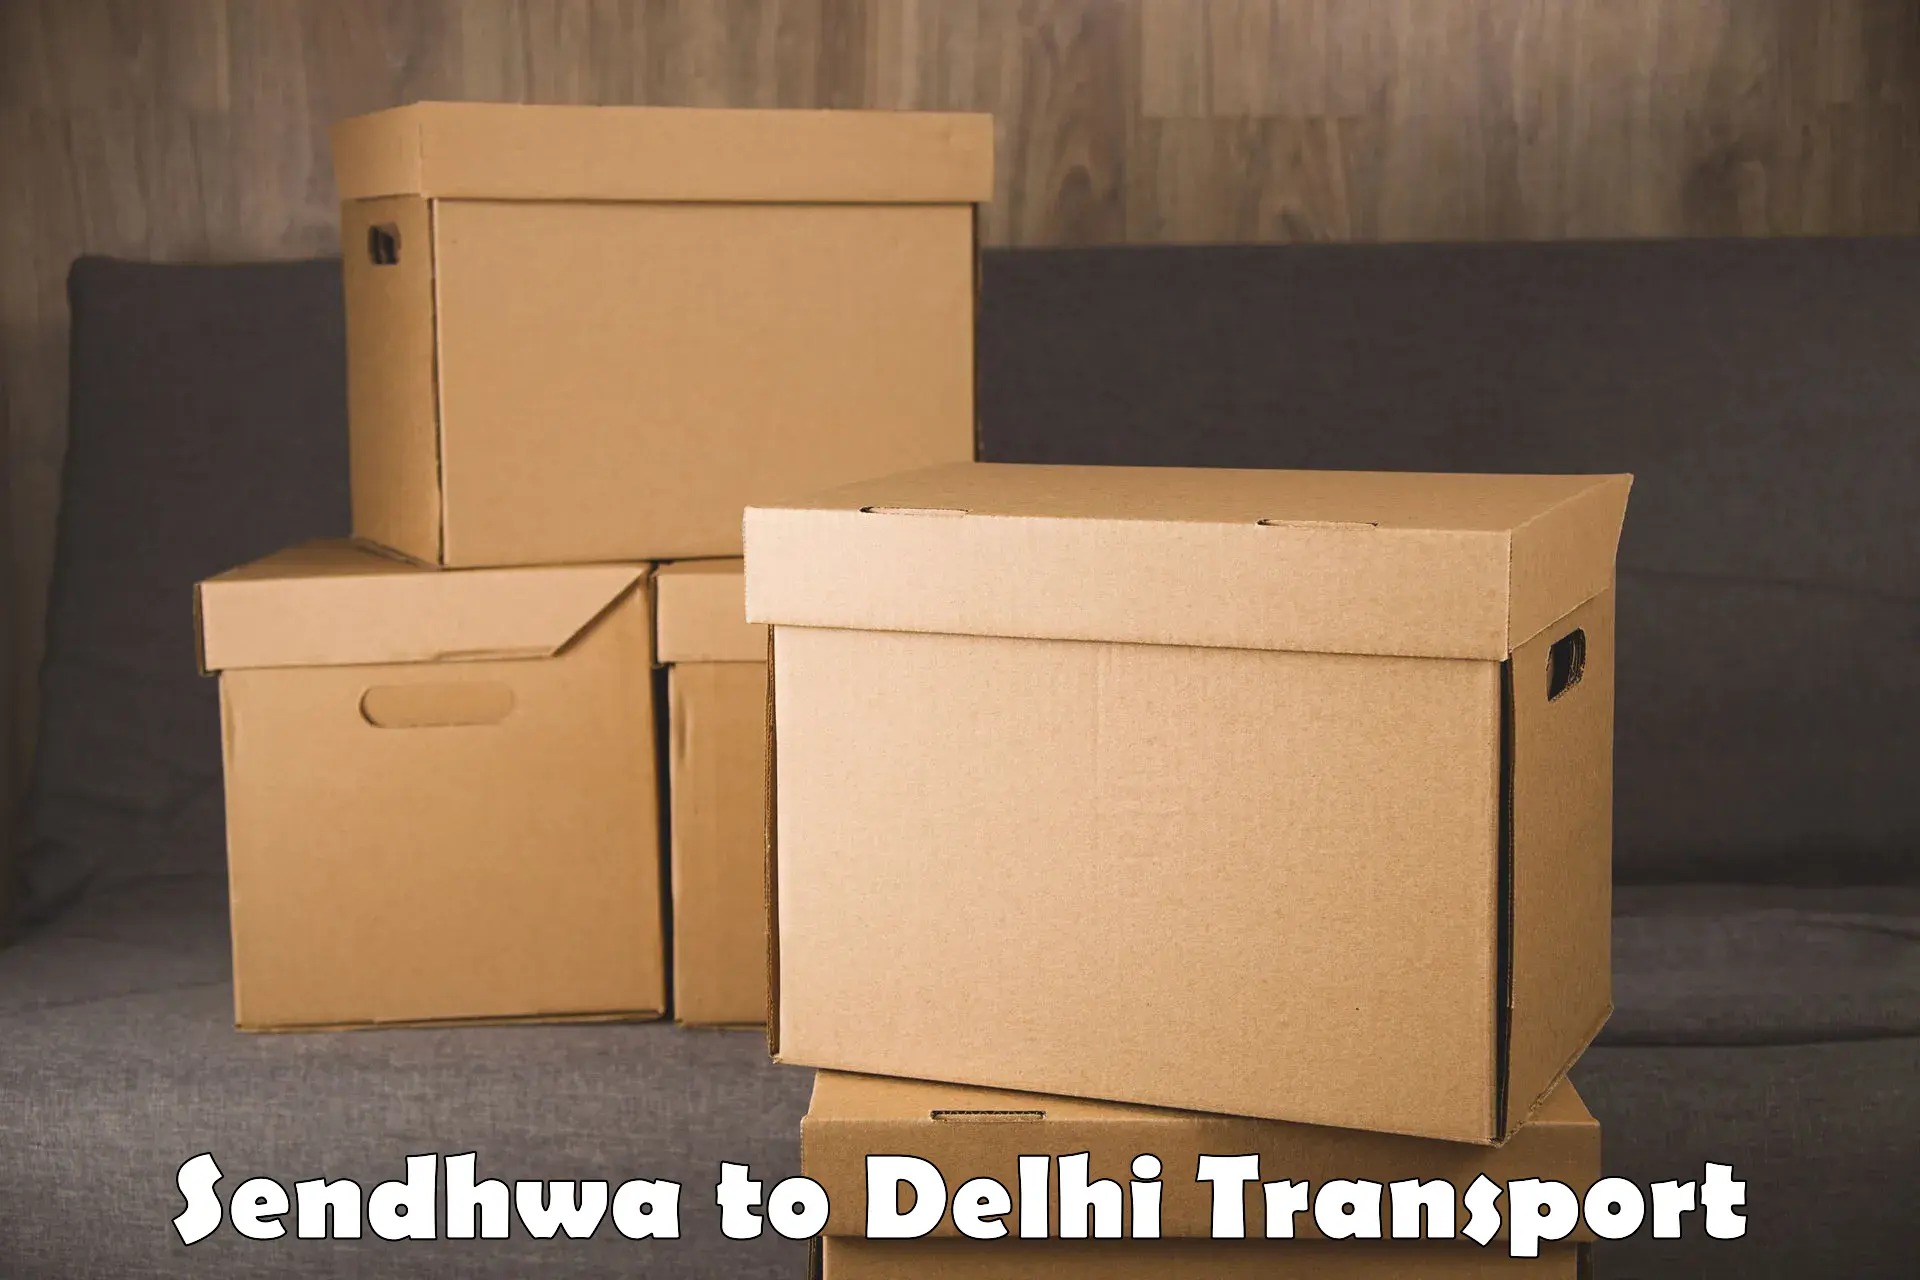 Air freight transport services Sendhwa to NCR